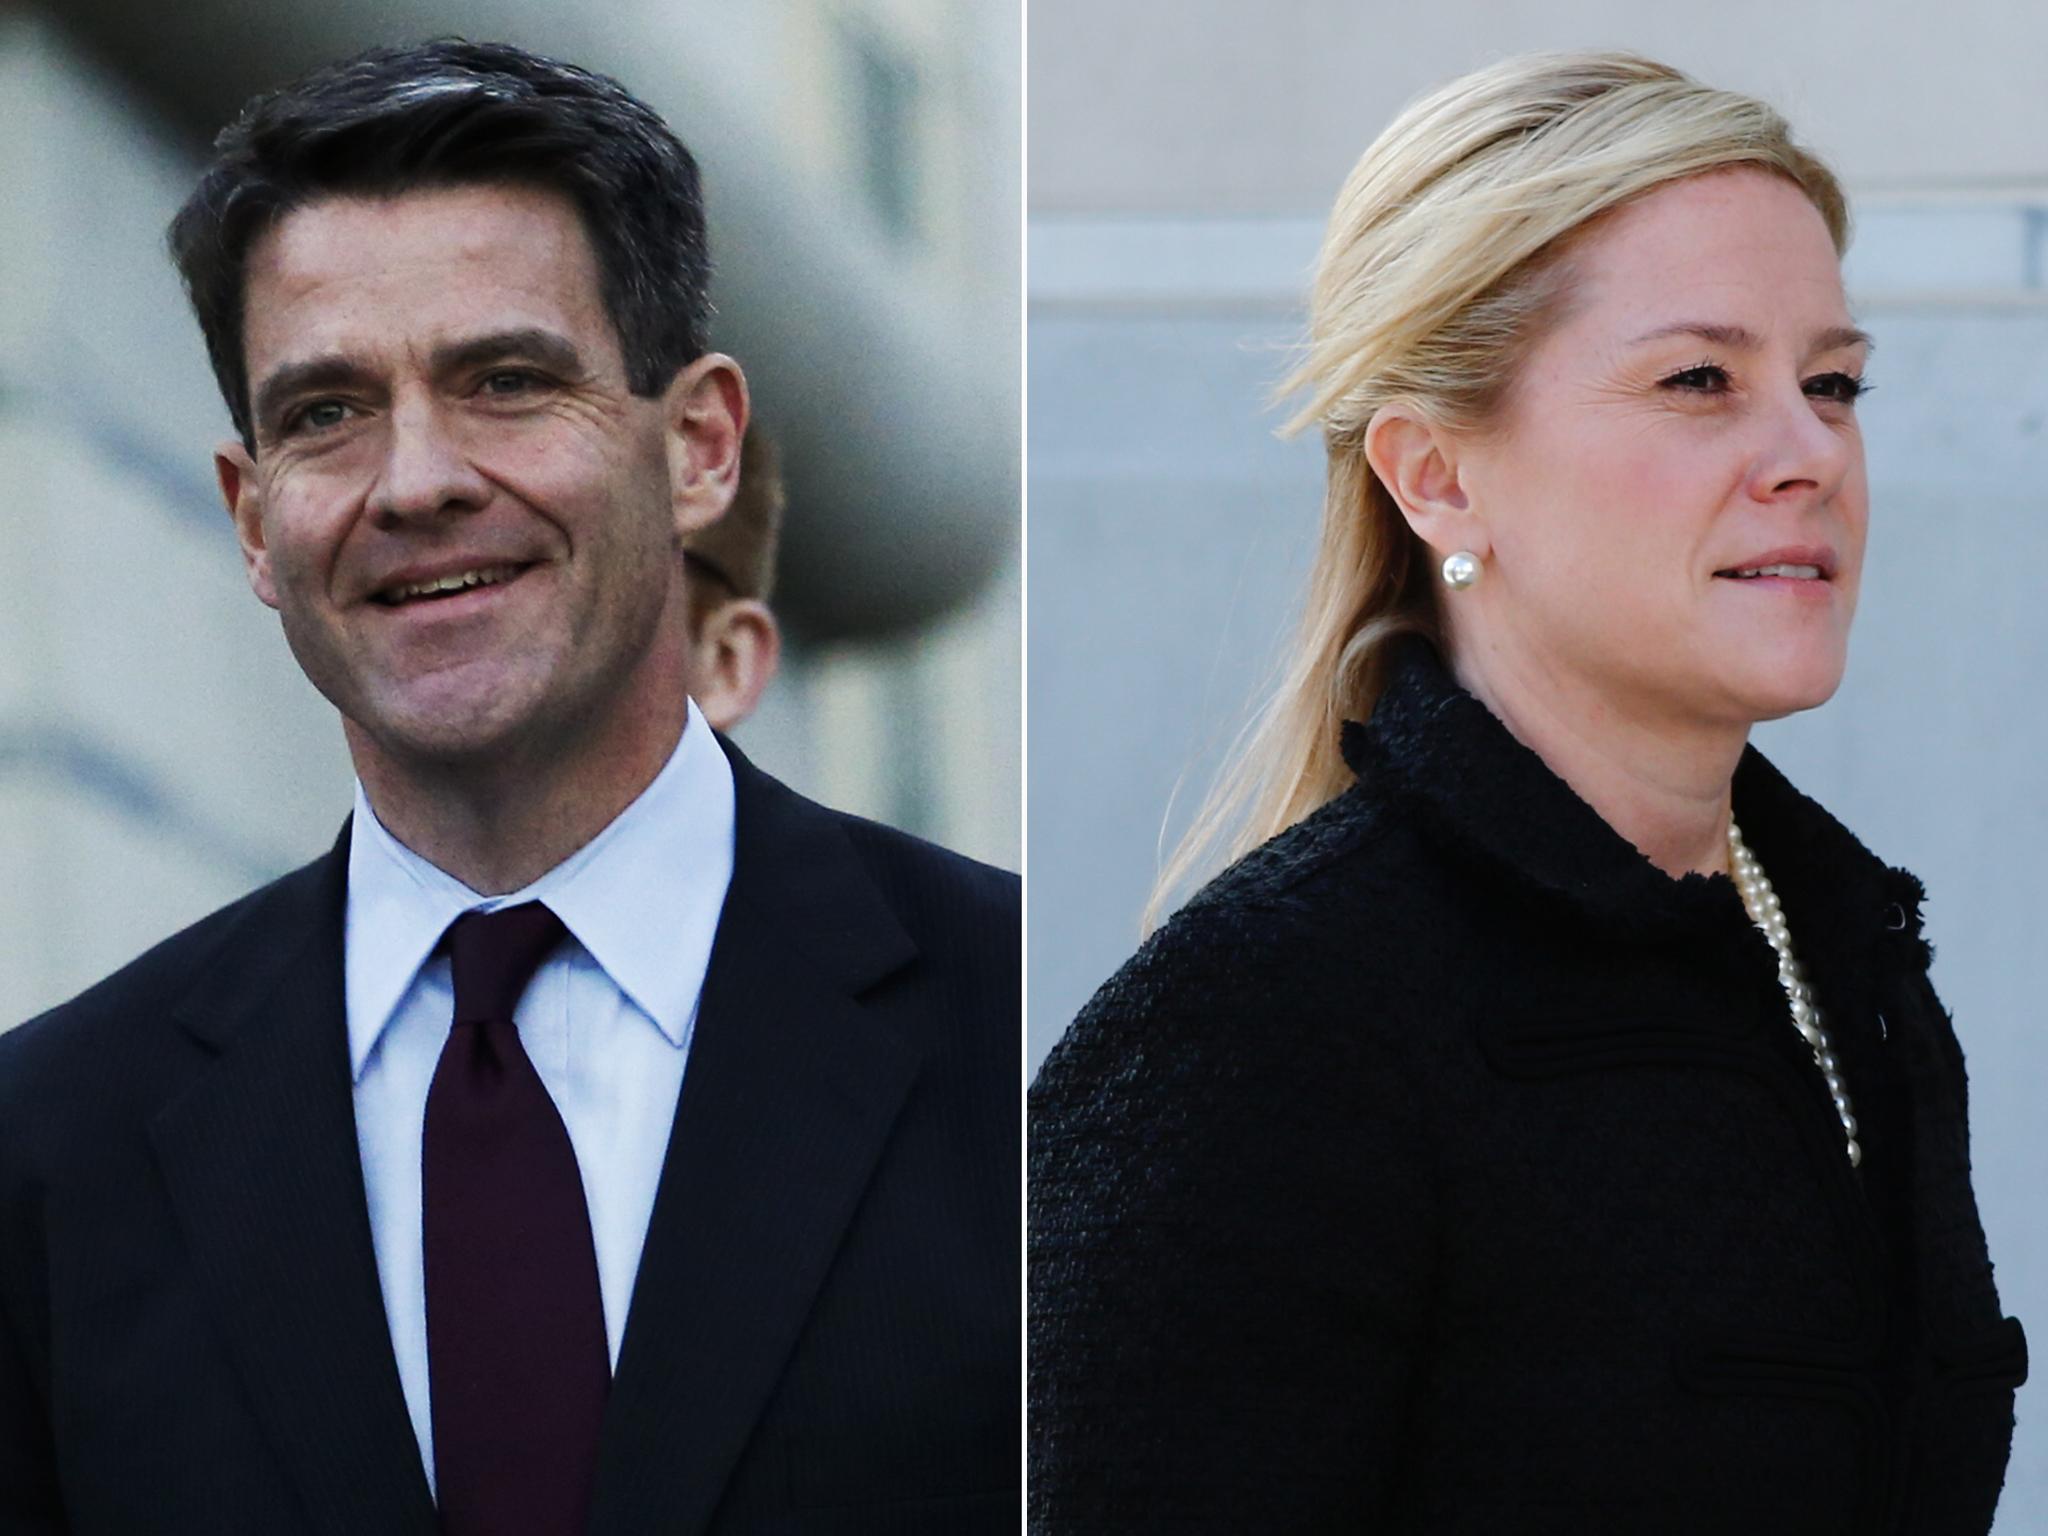 &#13;
The Supreme court said that the government overreached in prosecuting Bridget Kelly and Bill Baroni for their roles in the 'Bridgegate' scandal &#13;